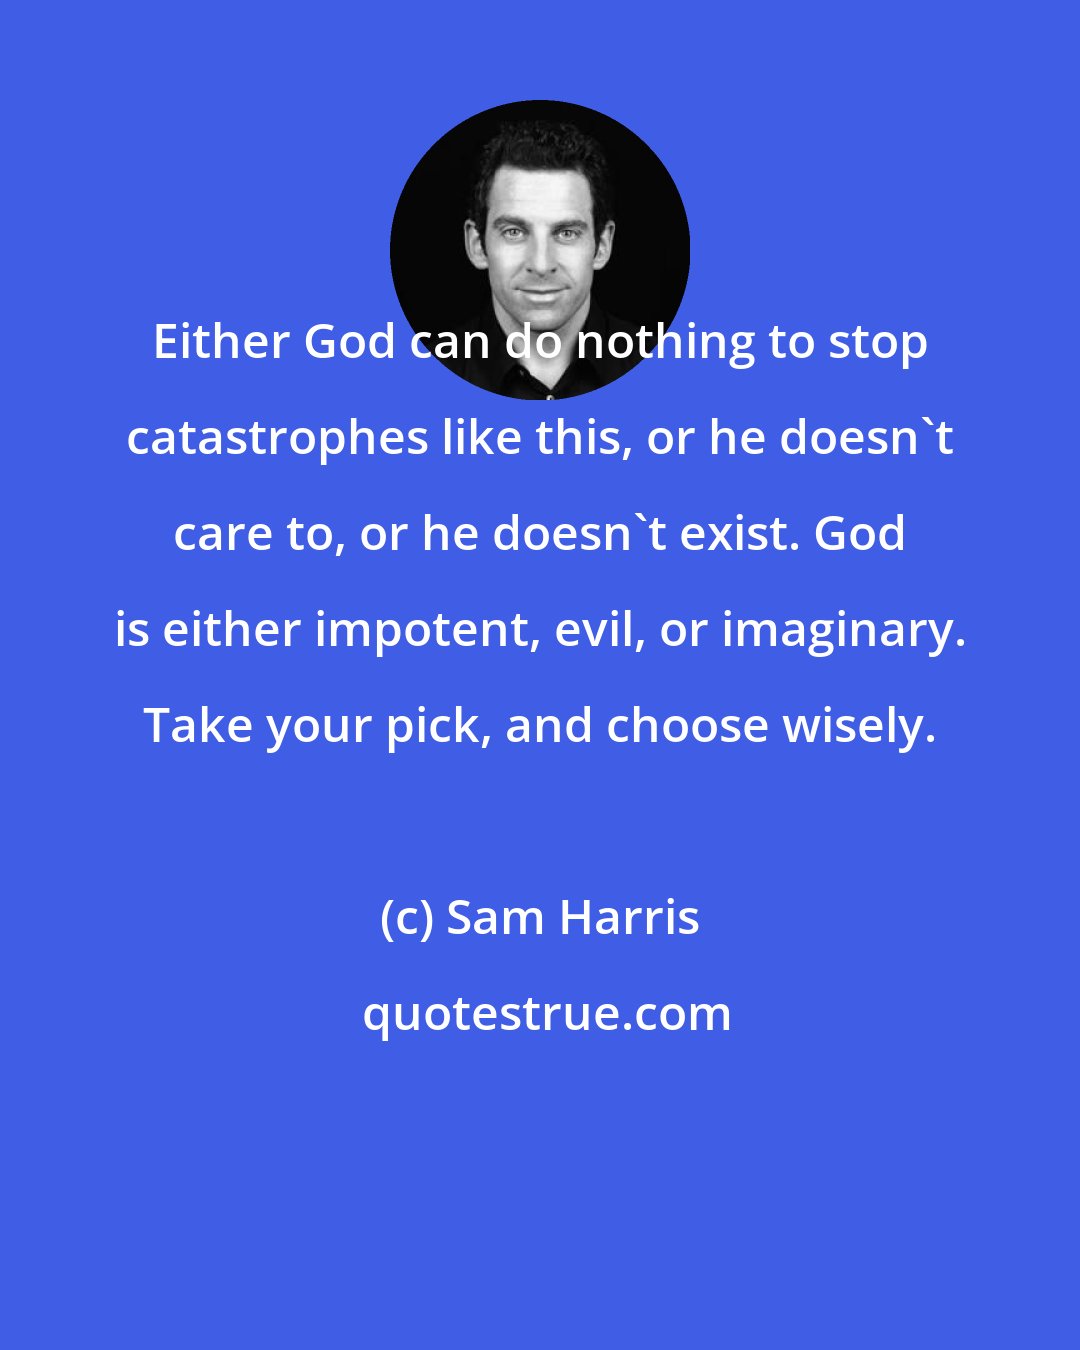 Sam Harris: Either God can do nothing to stop catastrophes like this, or he doesn't care to, or he doesn't exist. God is either impotent, evil, or imaginary. Take your pick, and choose wisely.